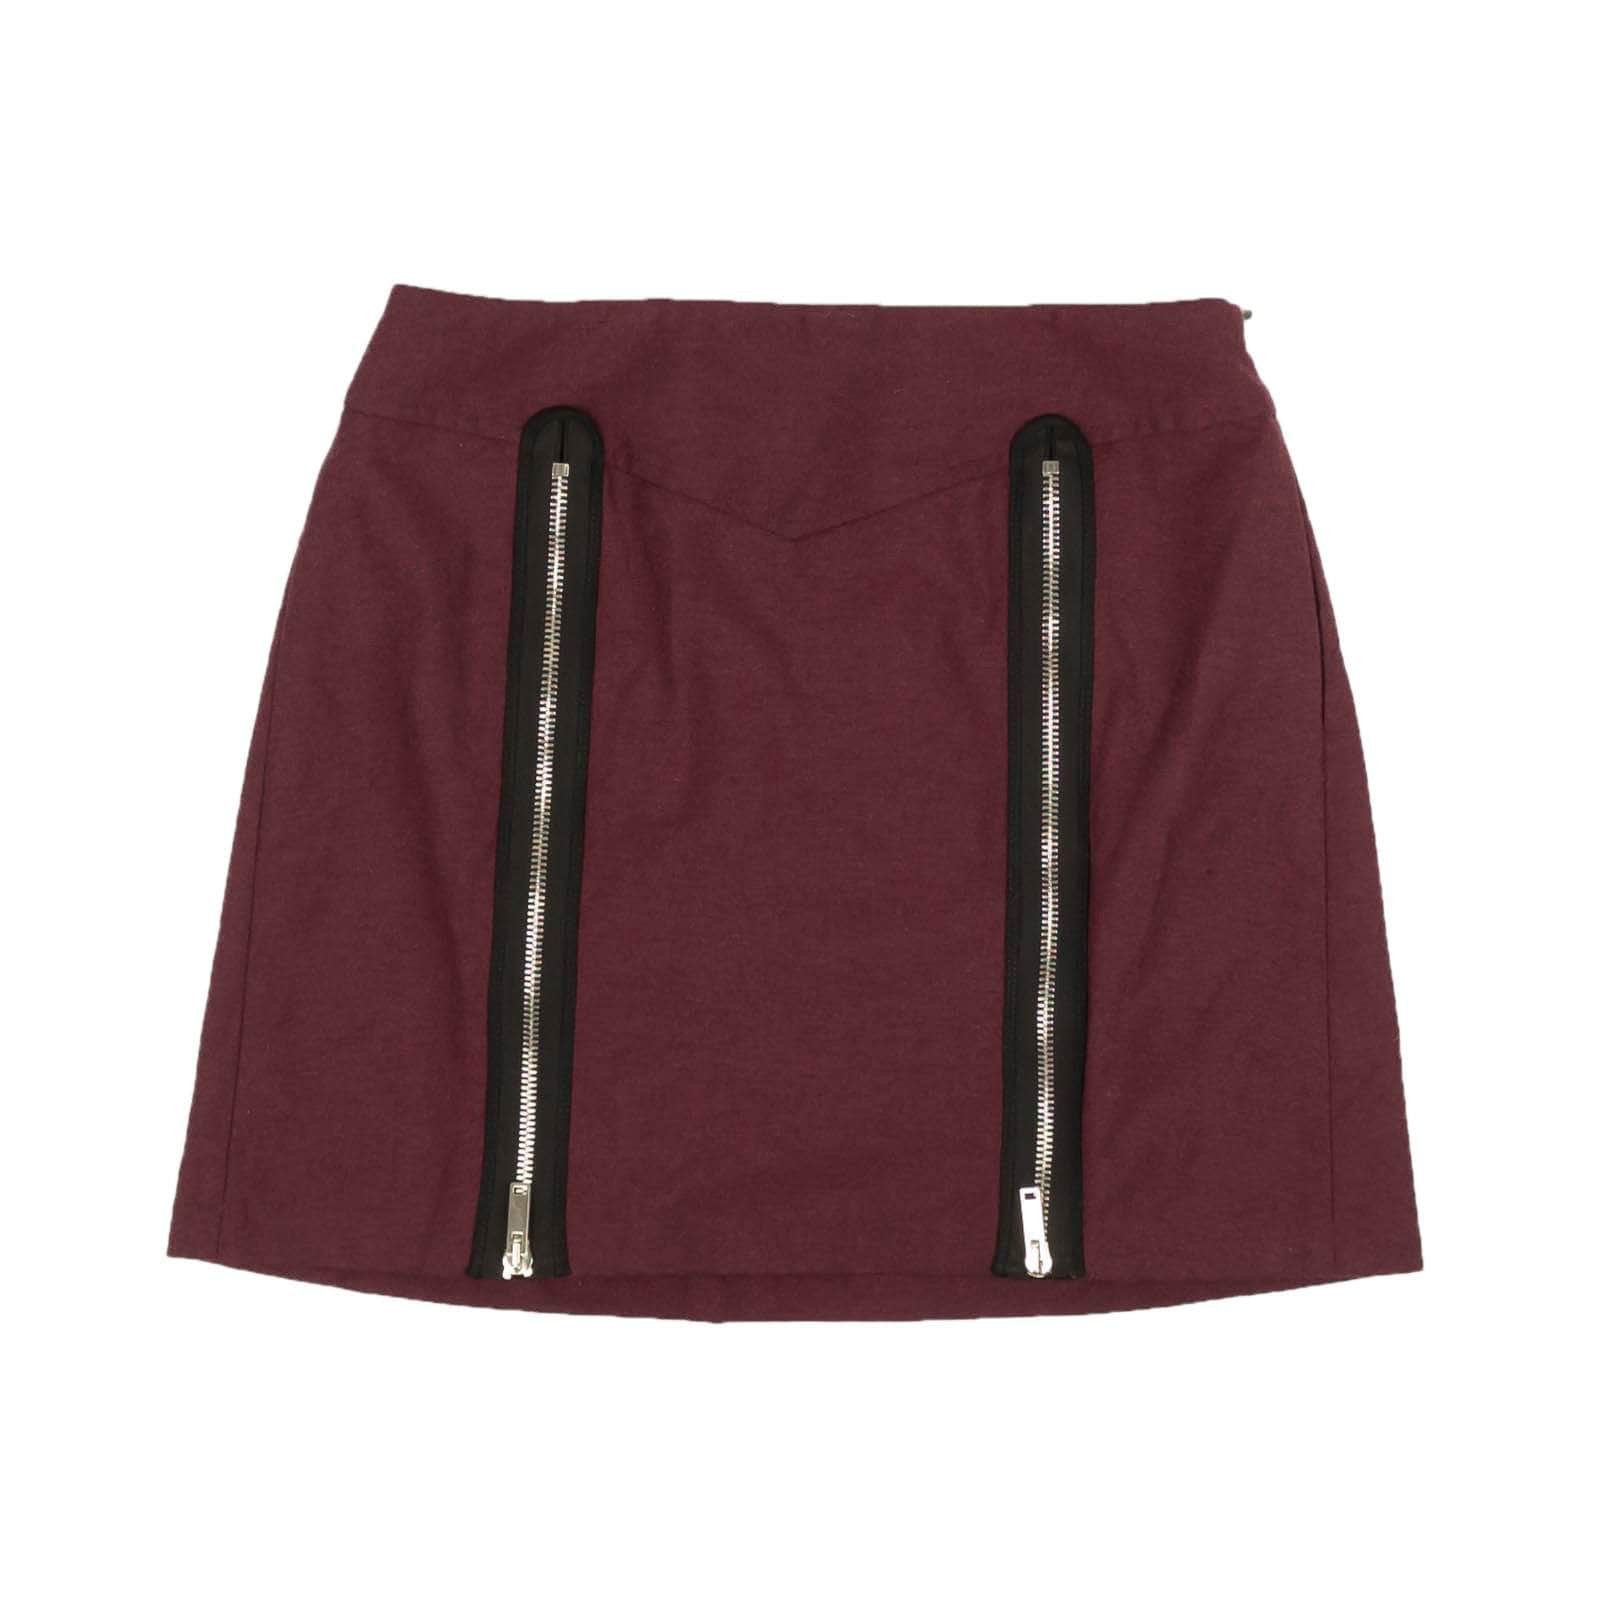 Palm Angels 250-500, channelenable-all, chicmi, couponcollection, gender-womens, main-clothing, palm-angels, size-40, womens-blouses 40 / 82NGG-PA-1406/40 Maroon Wool Blend Miniskirt 82NGG-PA-1406/40 82NGG-PA-1406/40